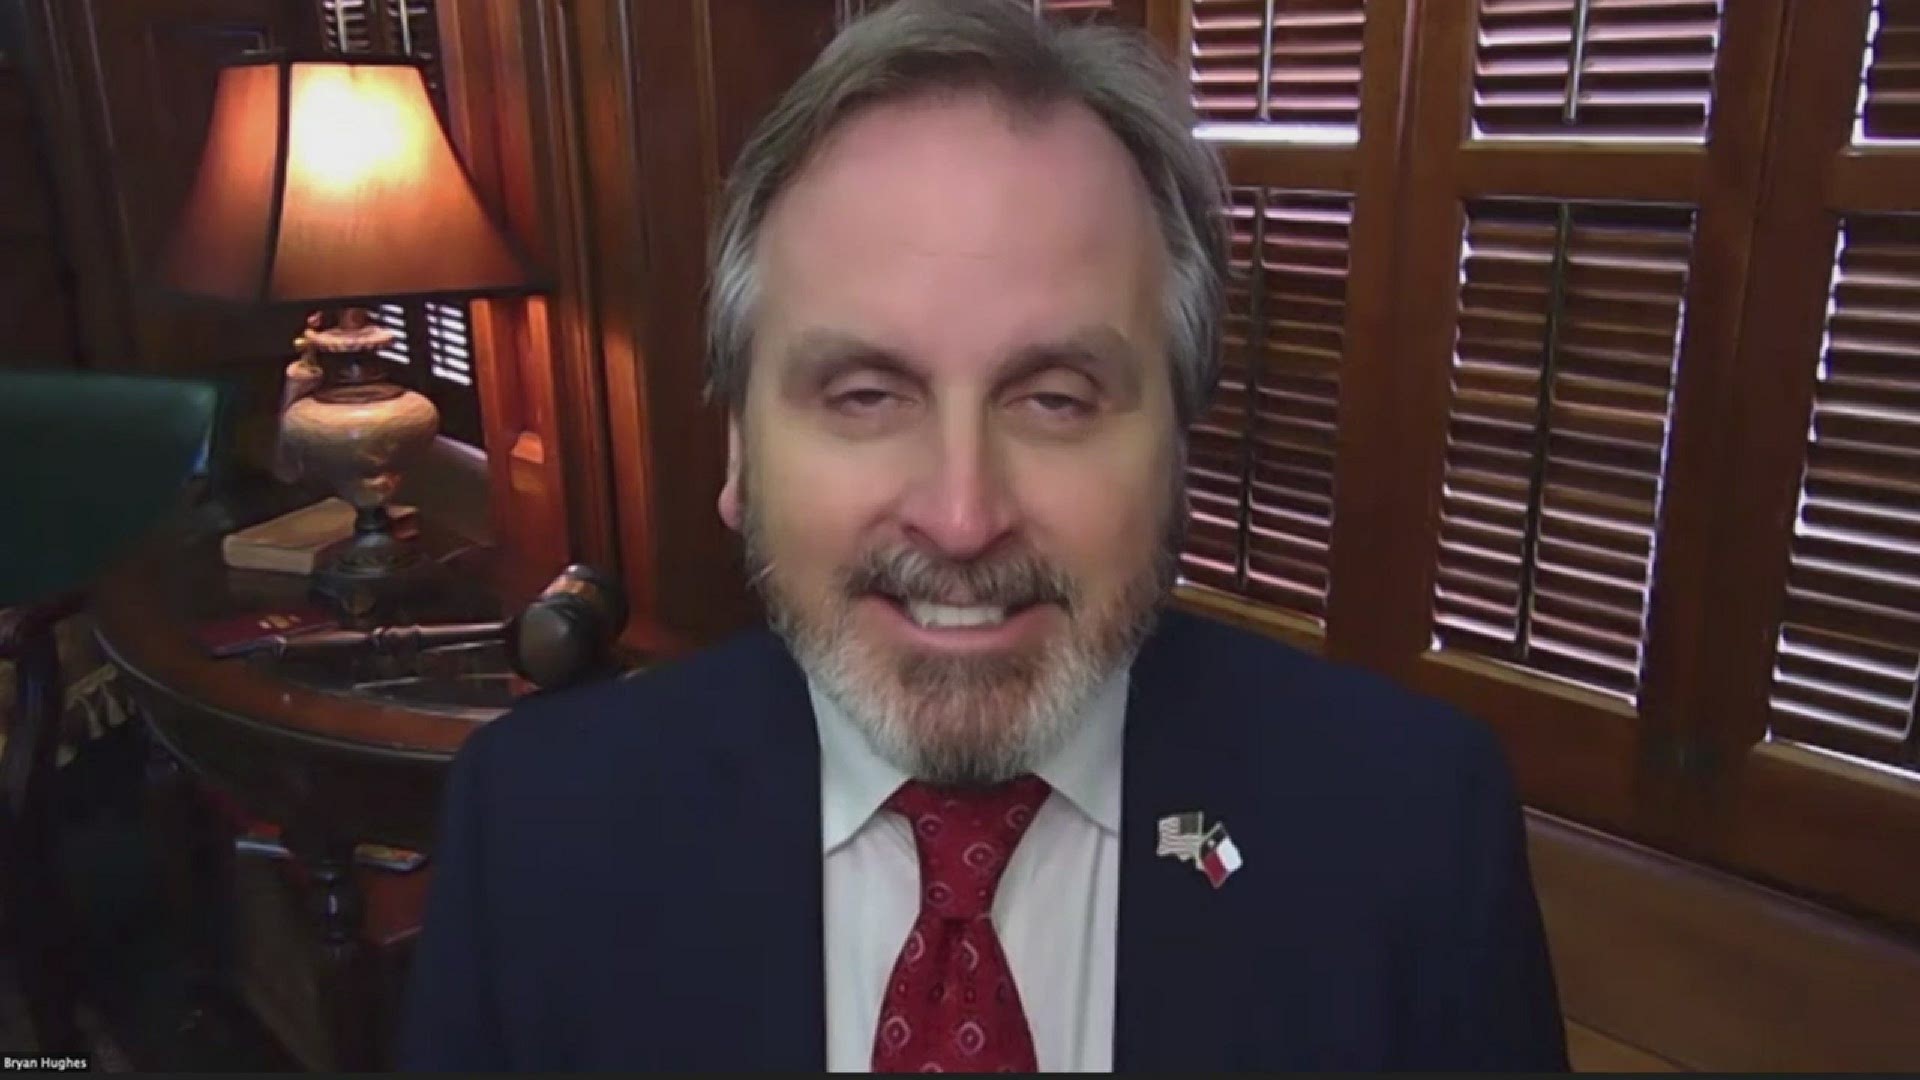 "I think we can all agree that only citizens have the right to vote, so cleaning up that voter rolls system is important,” Sen. Hughes said on Inside Texas Politics.